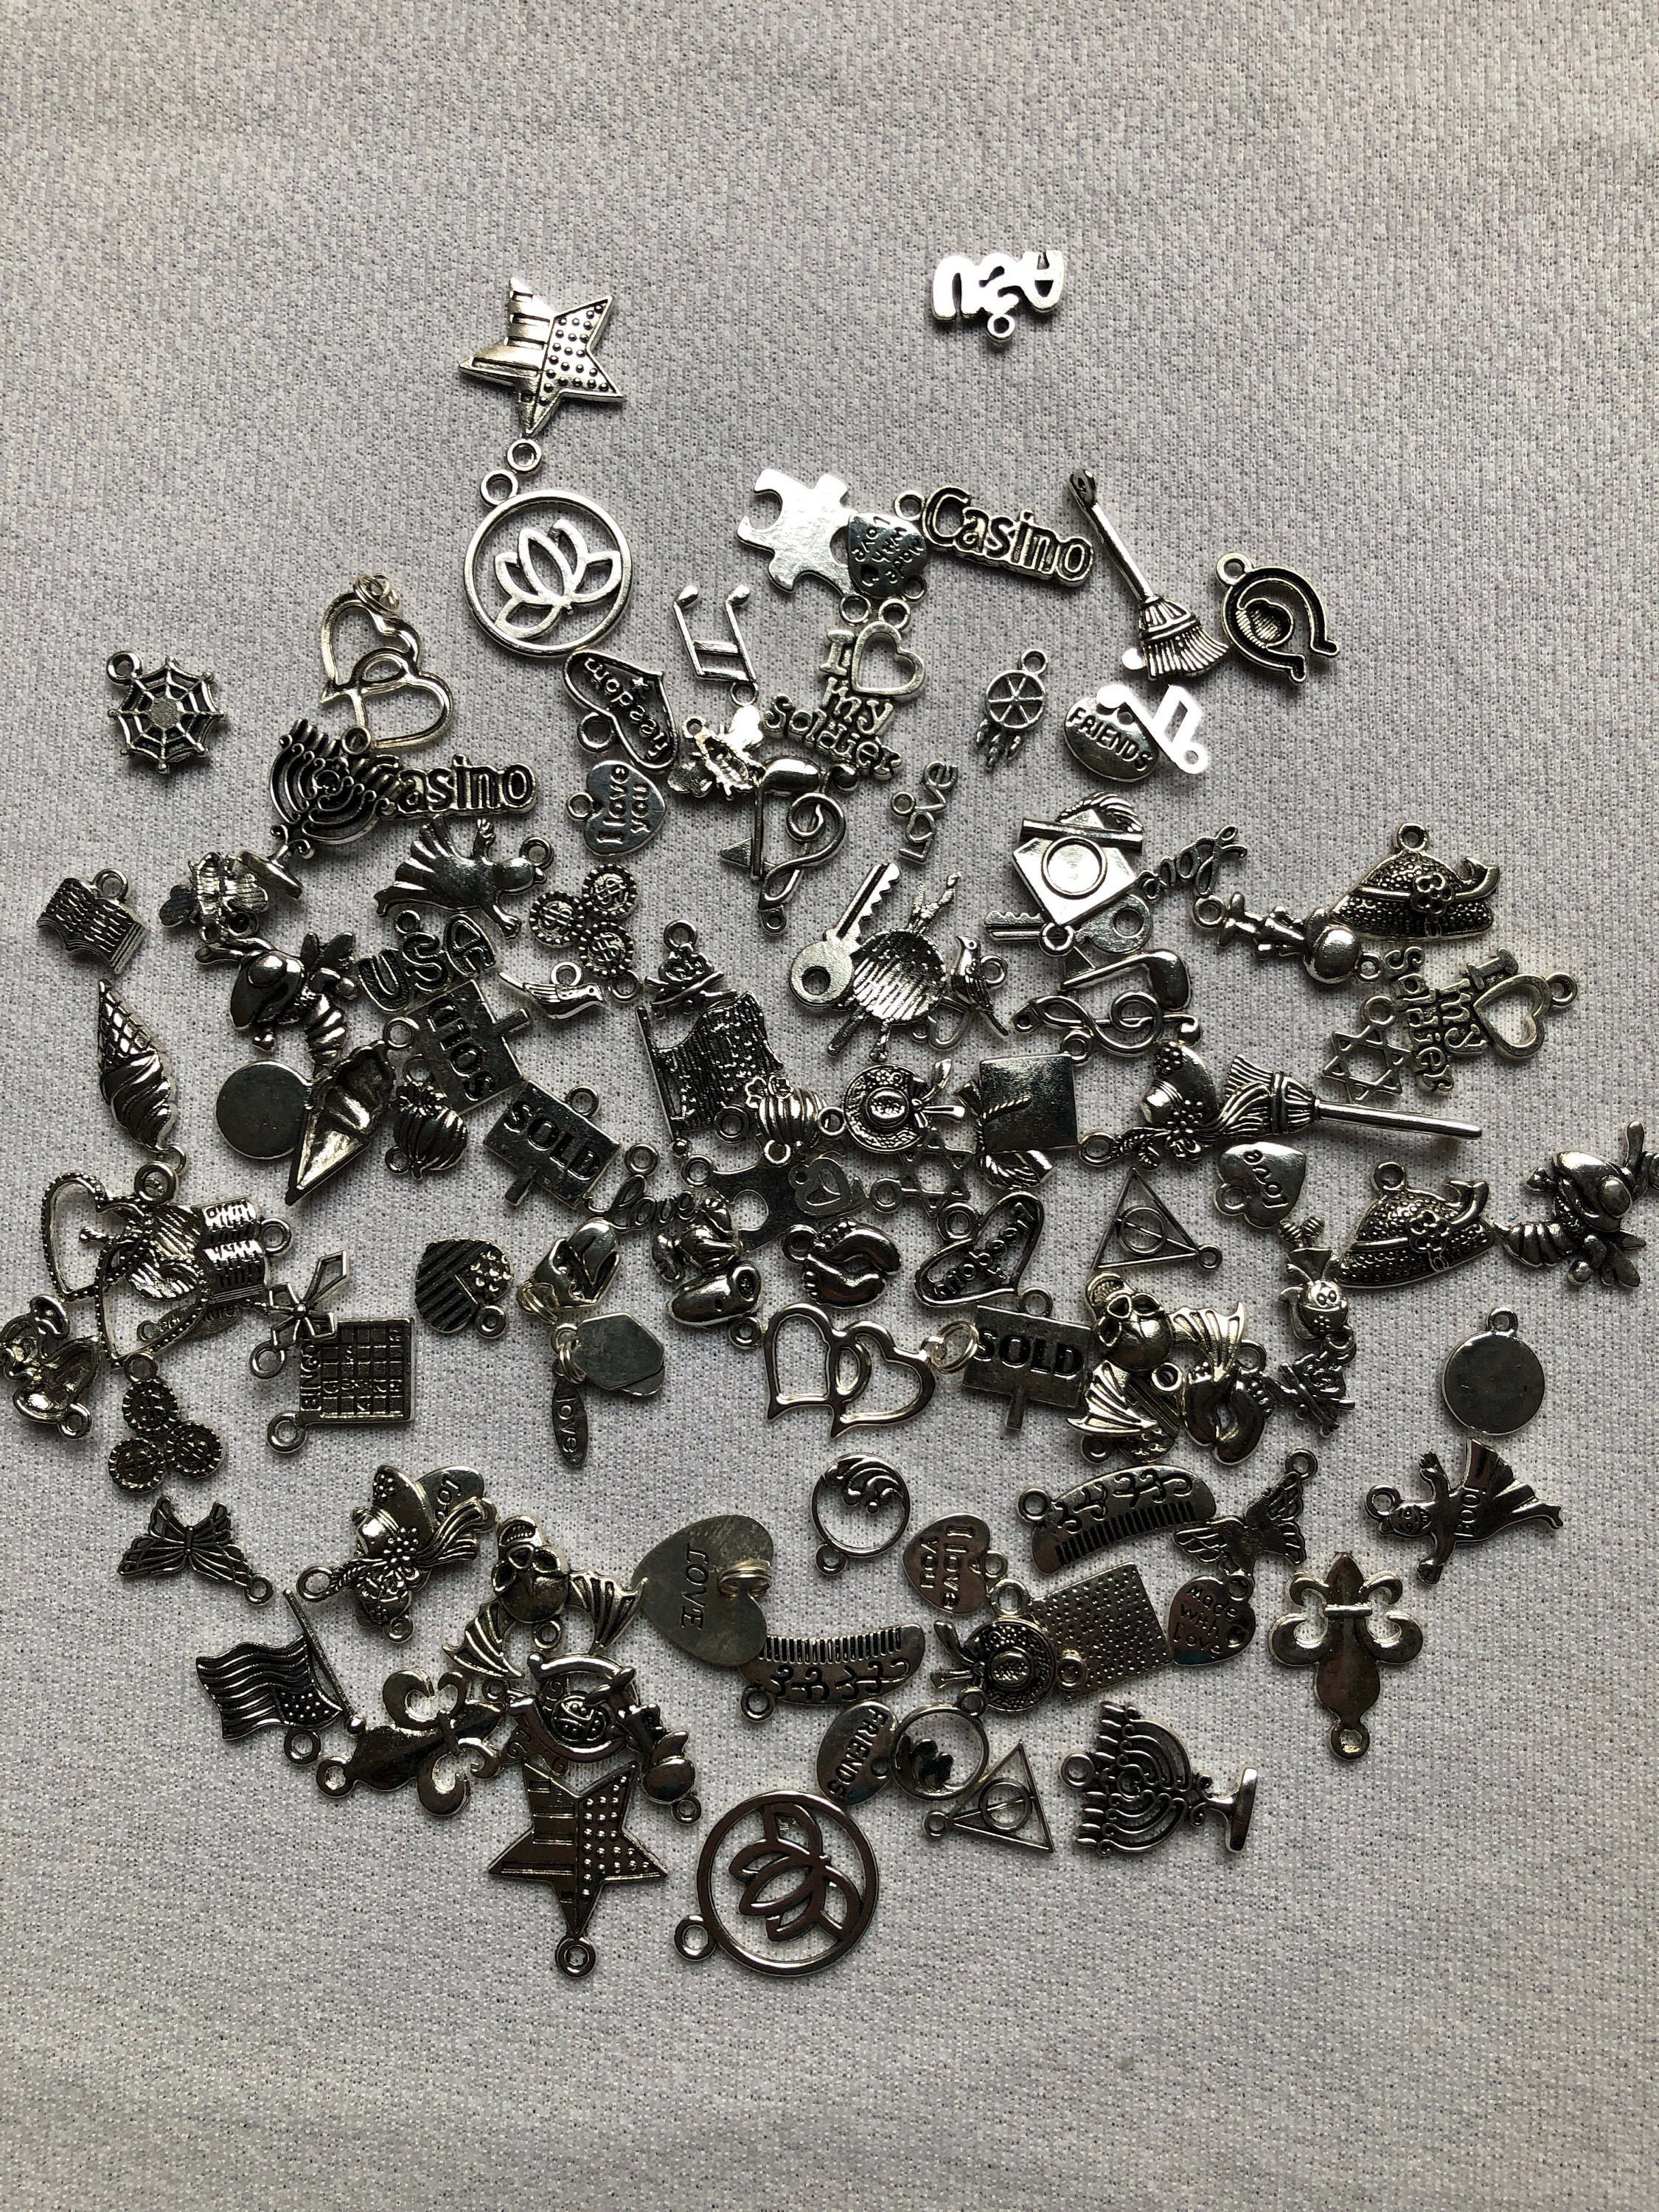 Liquidation Bulk Charms Lot, Pendant Charm Mix, Assorted Charms or